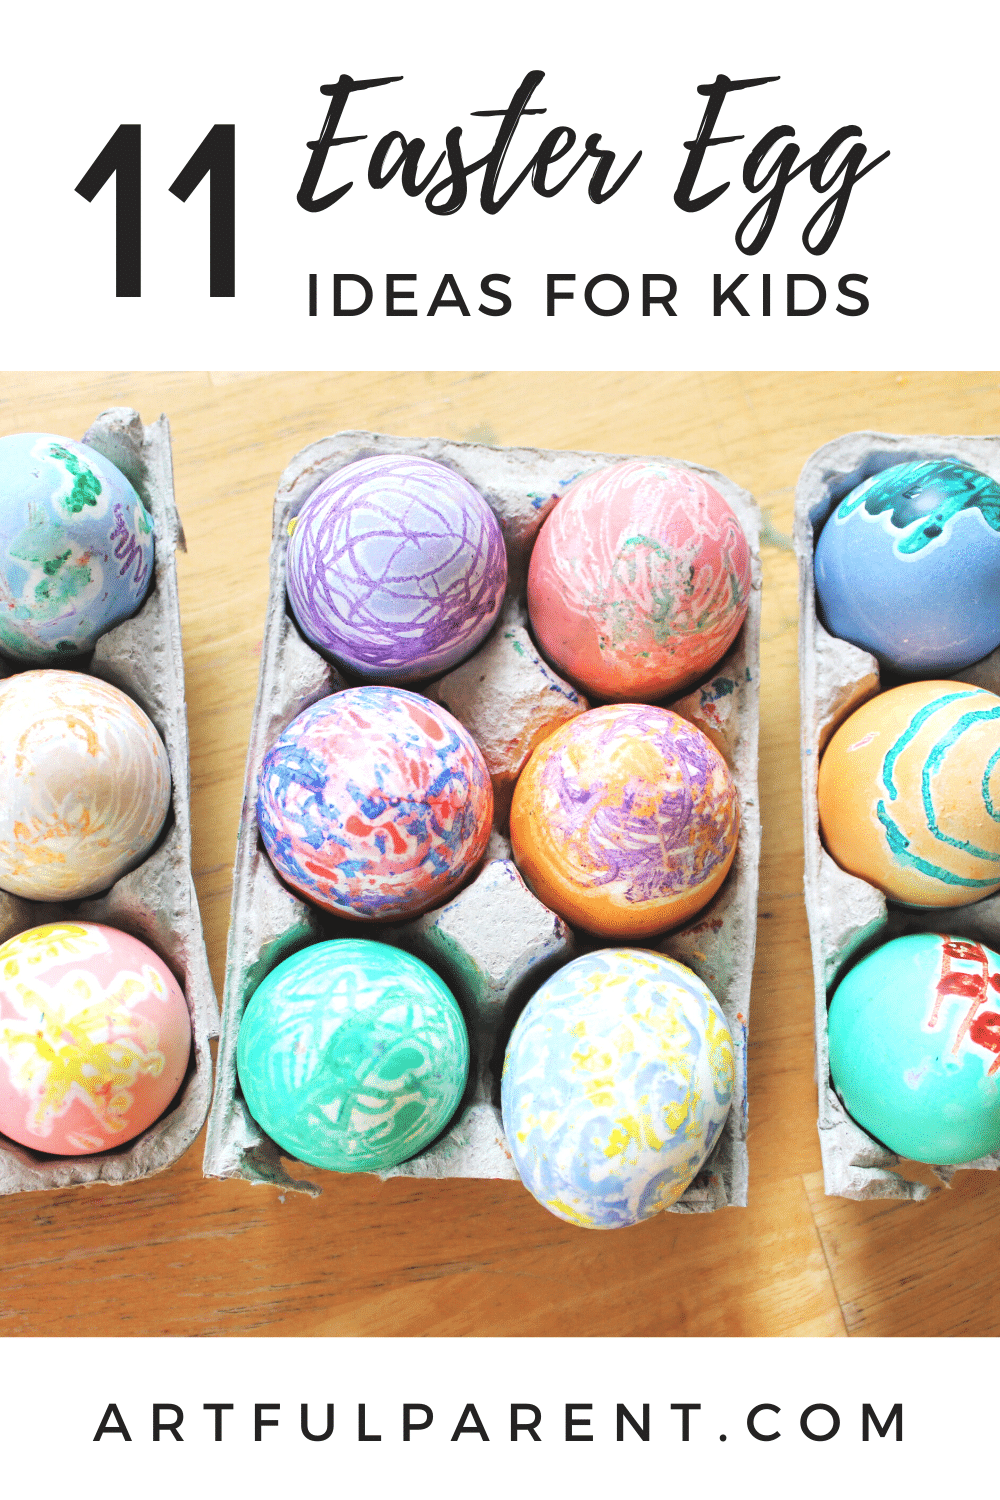 11 Ideas for Decorating Easter Eggs